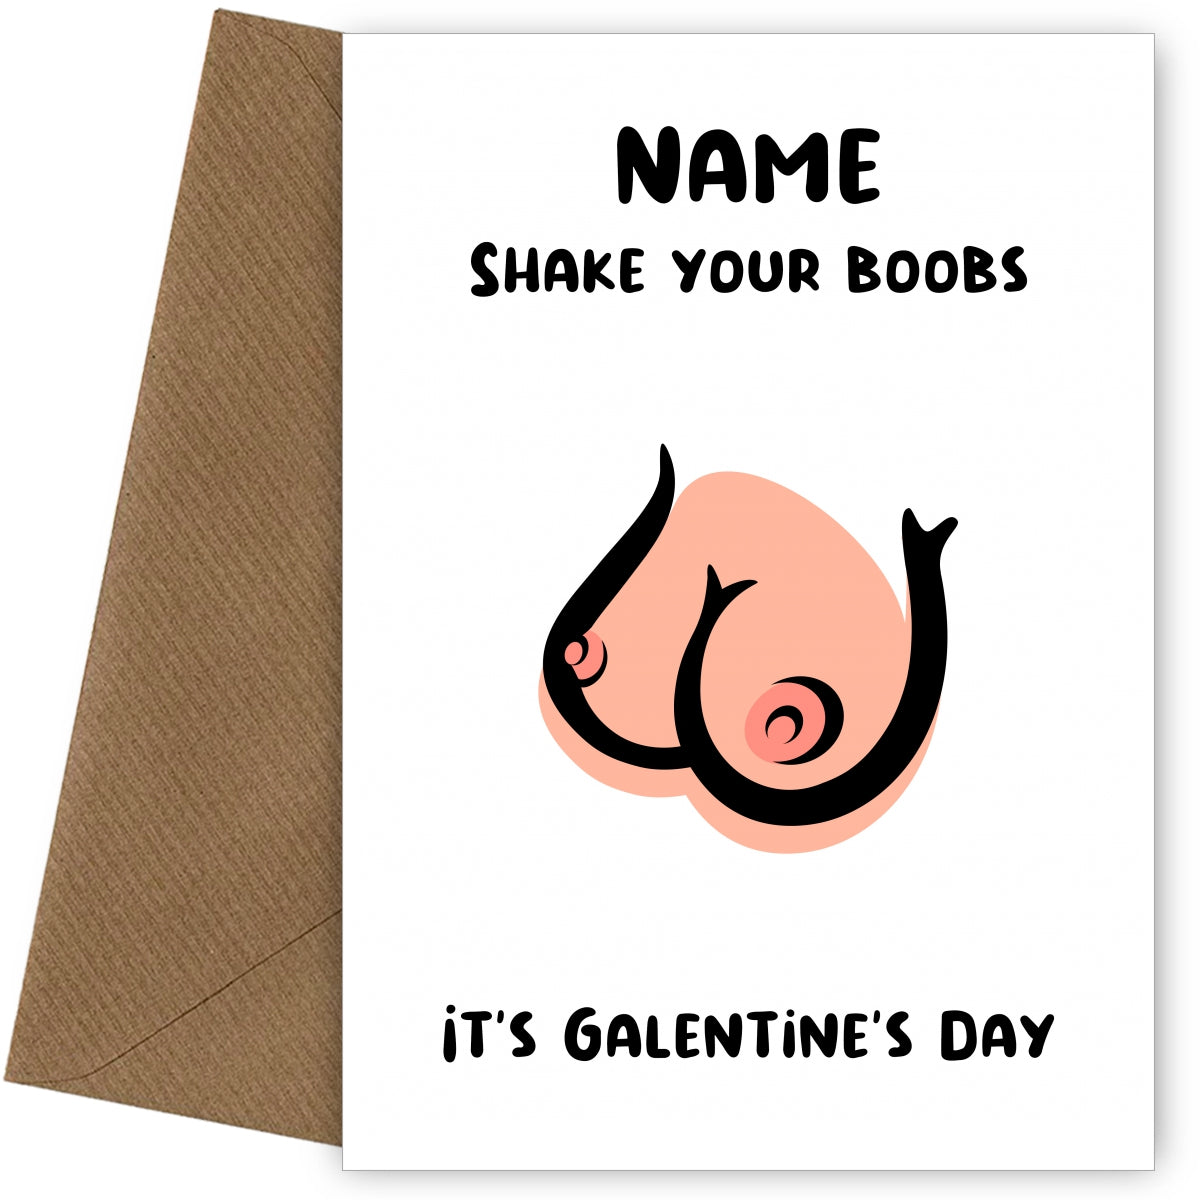 Happy Galentine's Day Card for Her - Shake Your Boobs